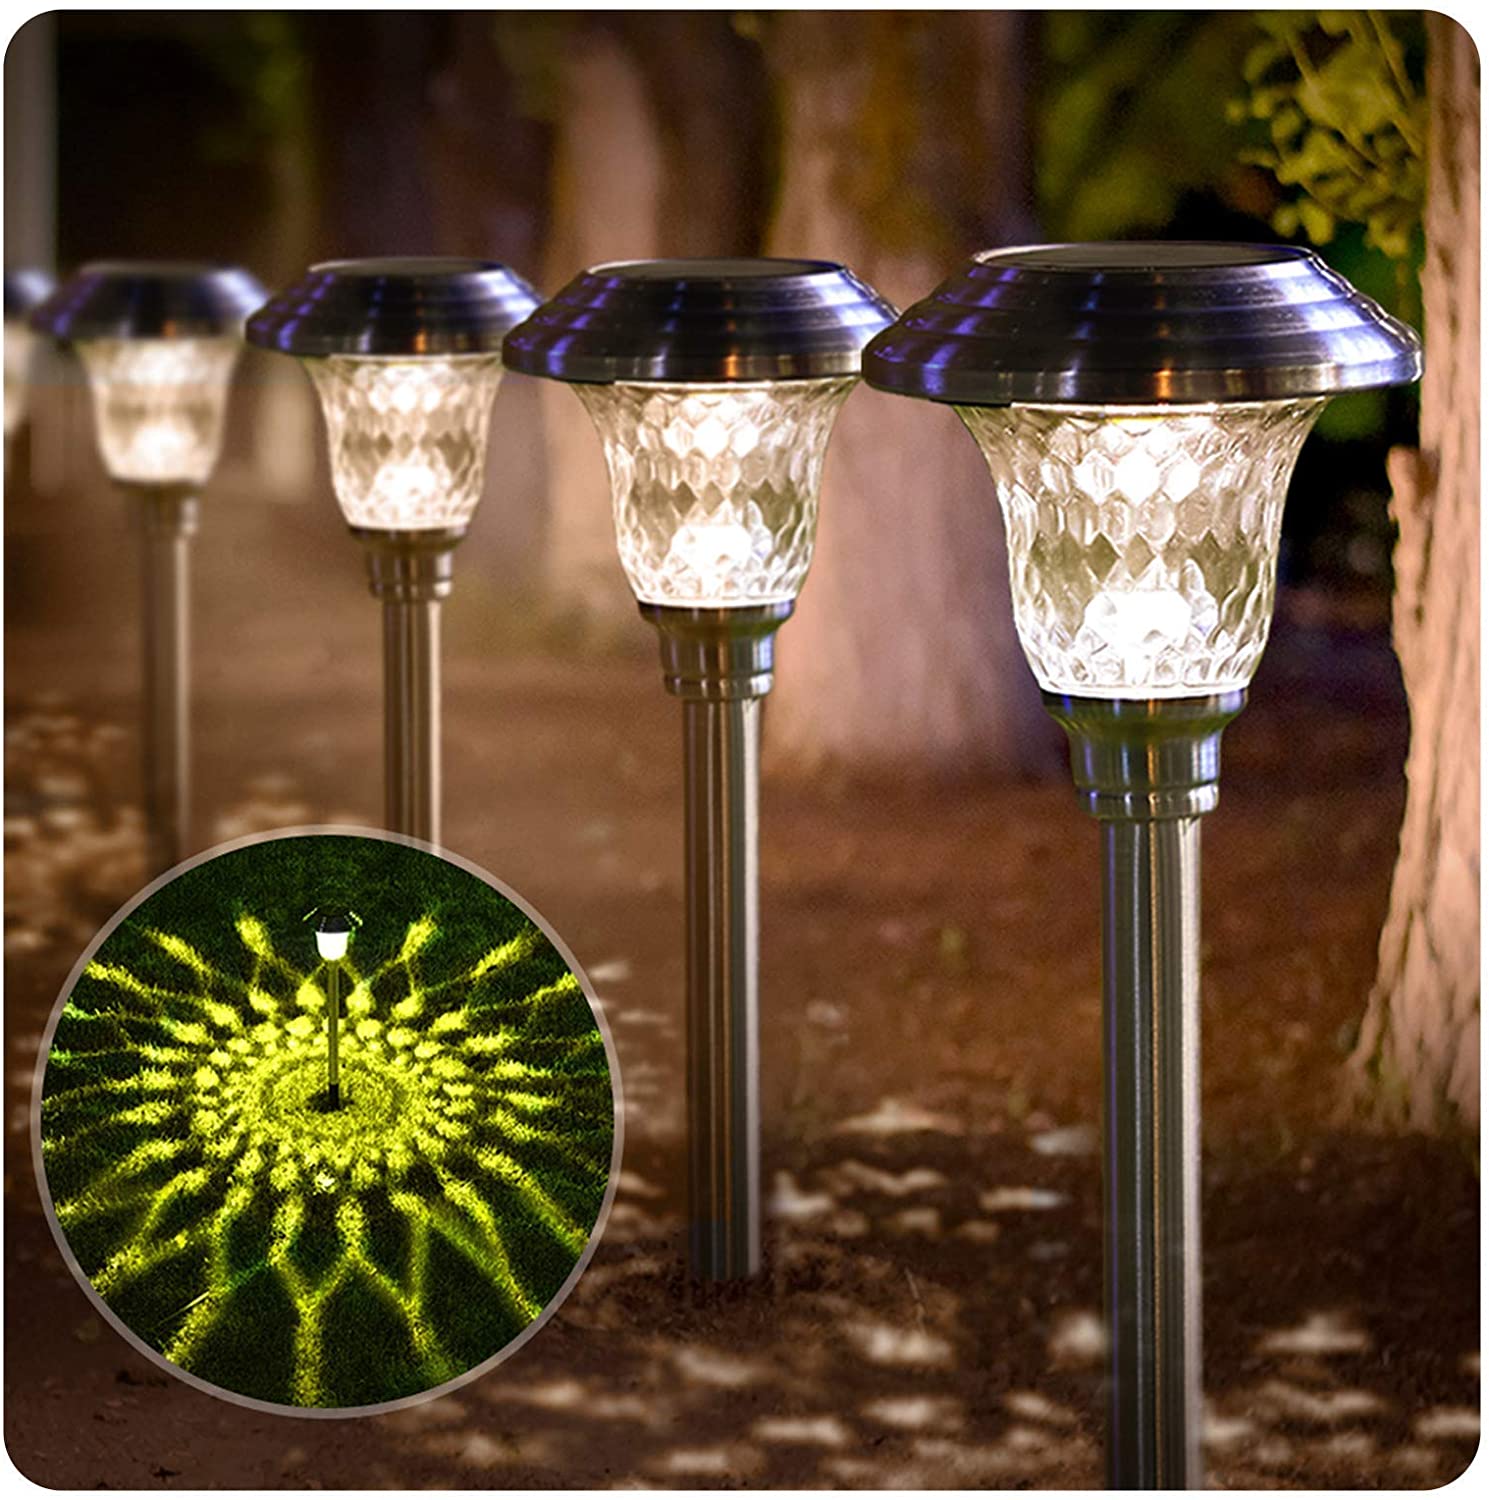 8 Pack Glass Solar Pathway Landscaping Lights Waterproof Silver $24.98 @Amazon